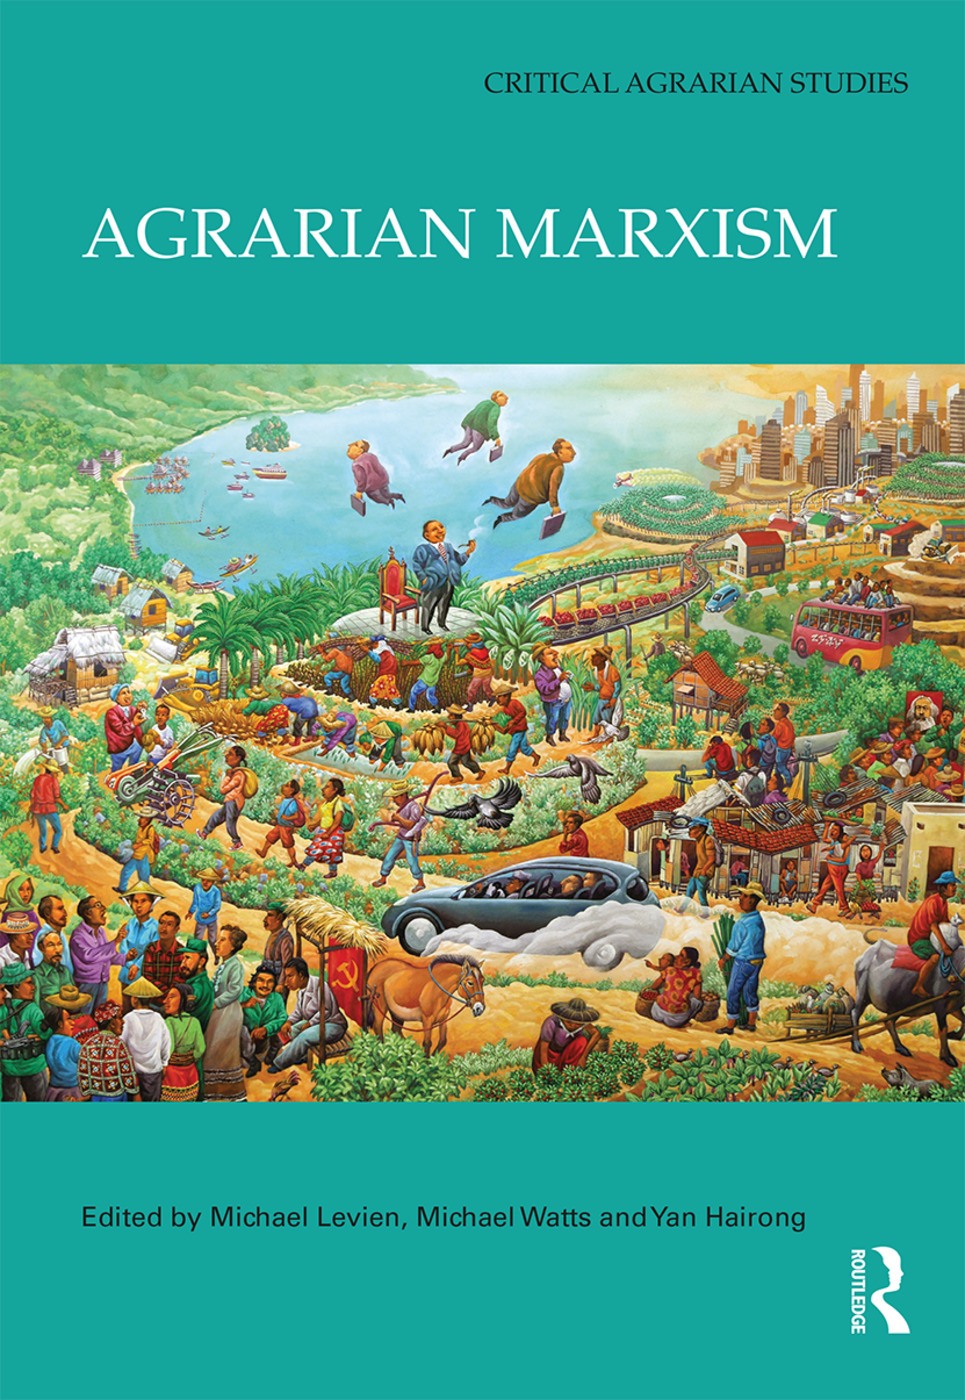 Agrarian Marxism (Edited by Michael Levien, Michael Watts and Hairong Yan) Promo Image